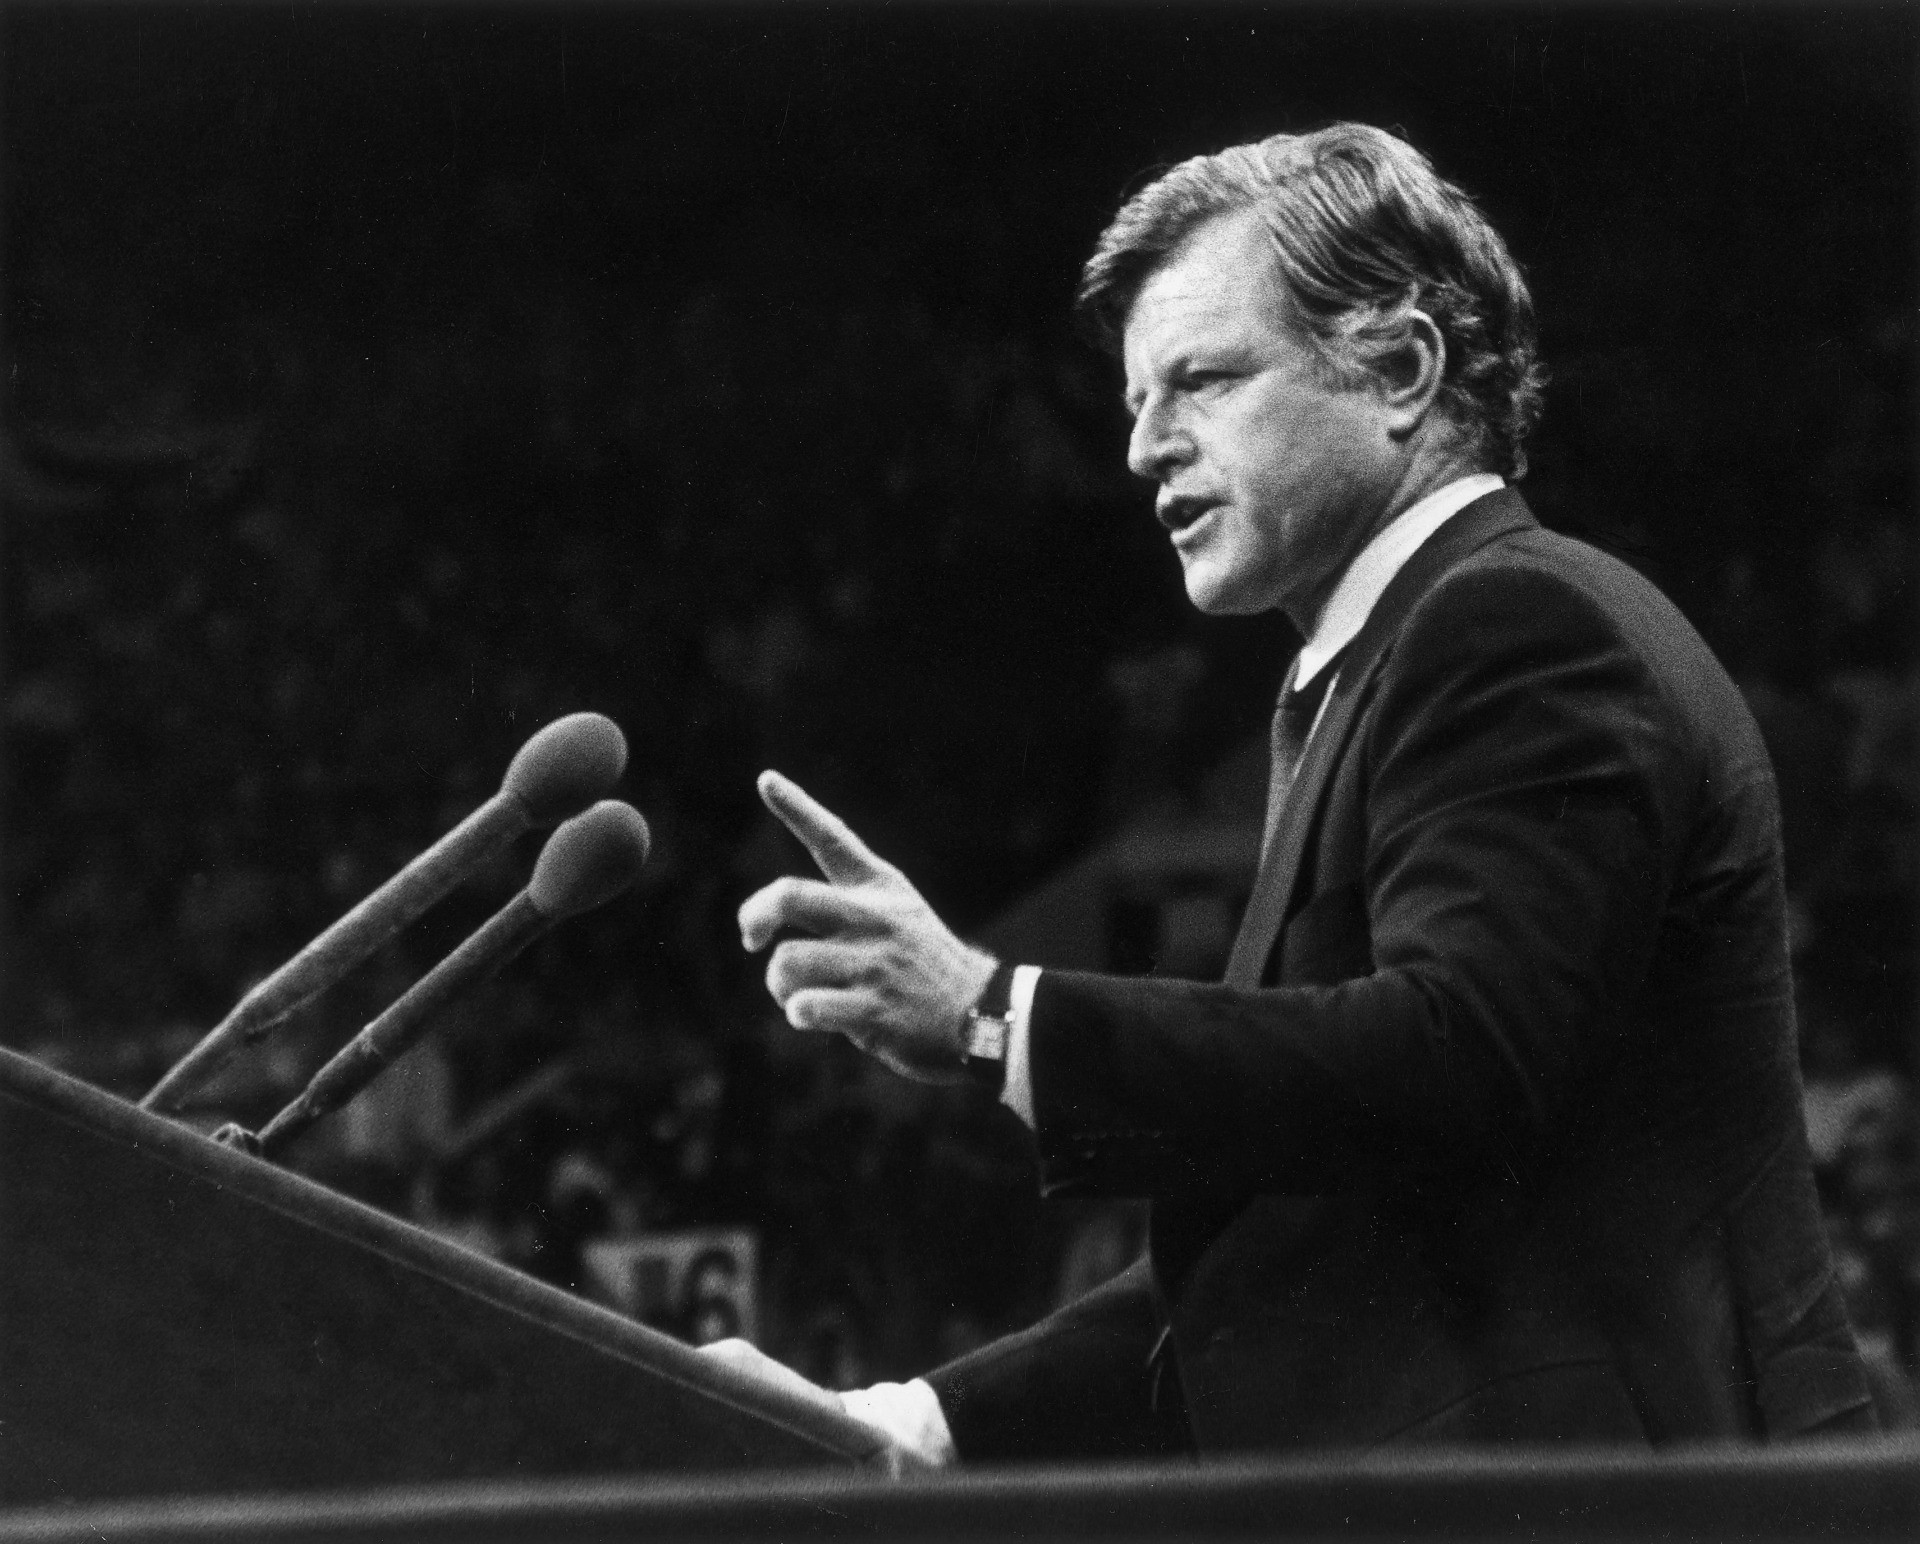 Sen. Ted Kennedy (D-MA) speaking at the Democratic convention in New York shortly after being defeated by President Jimmy Carter for the 1980 Democratic presidential nomination on August 12, 1980. (Keystone/Getty Images)